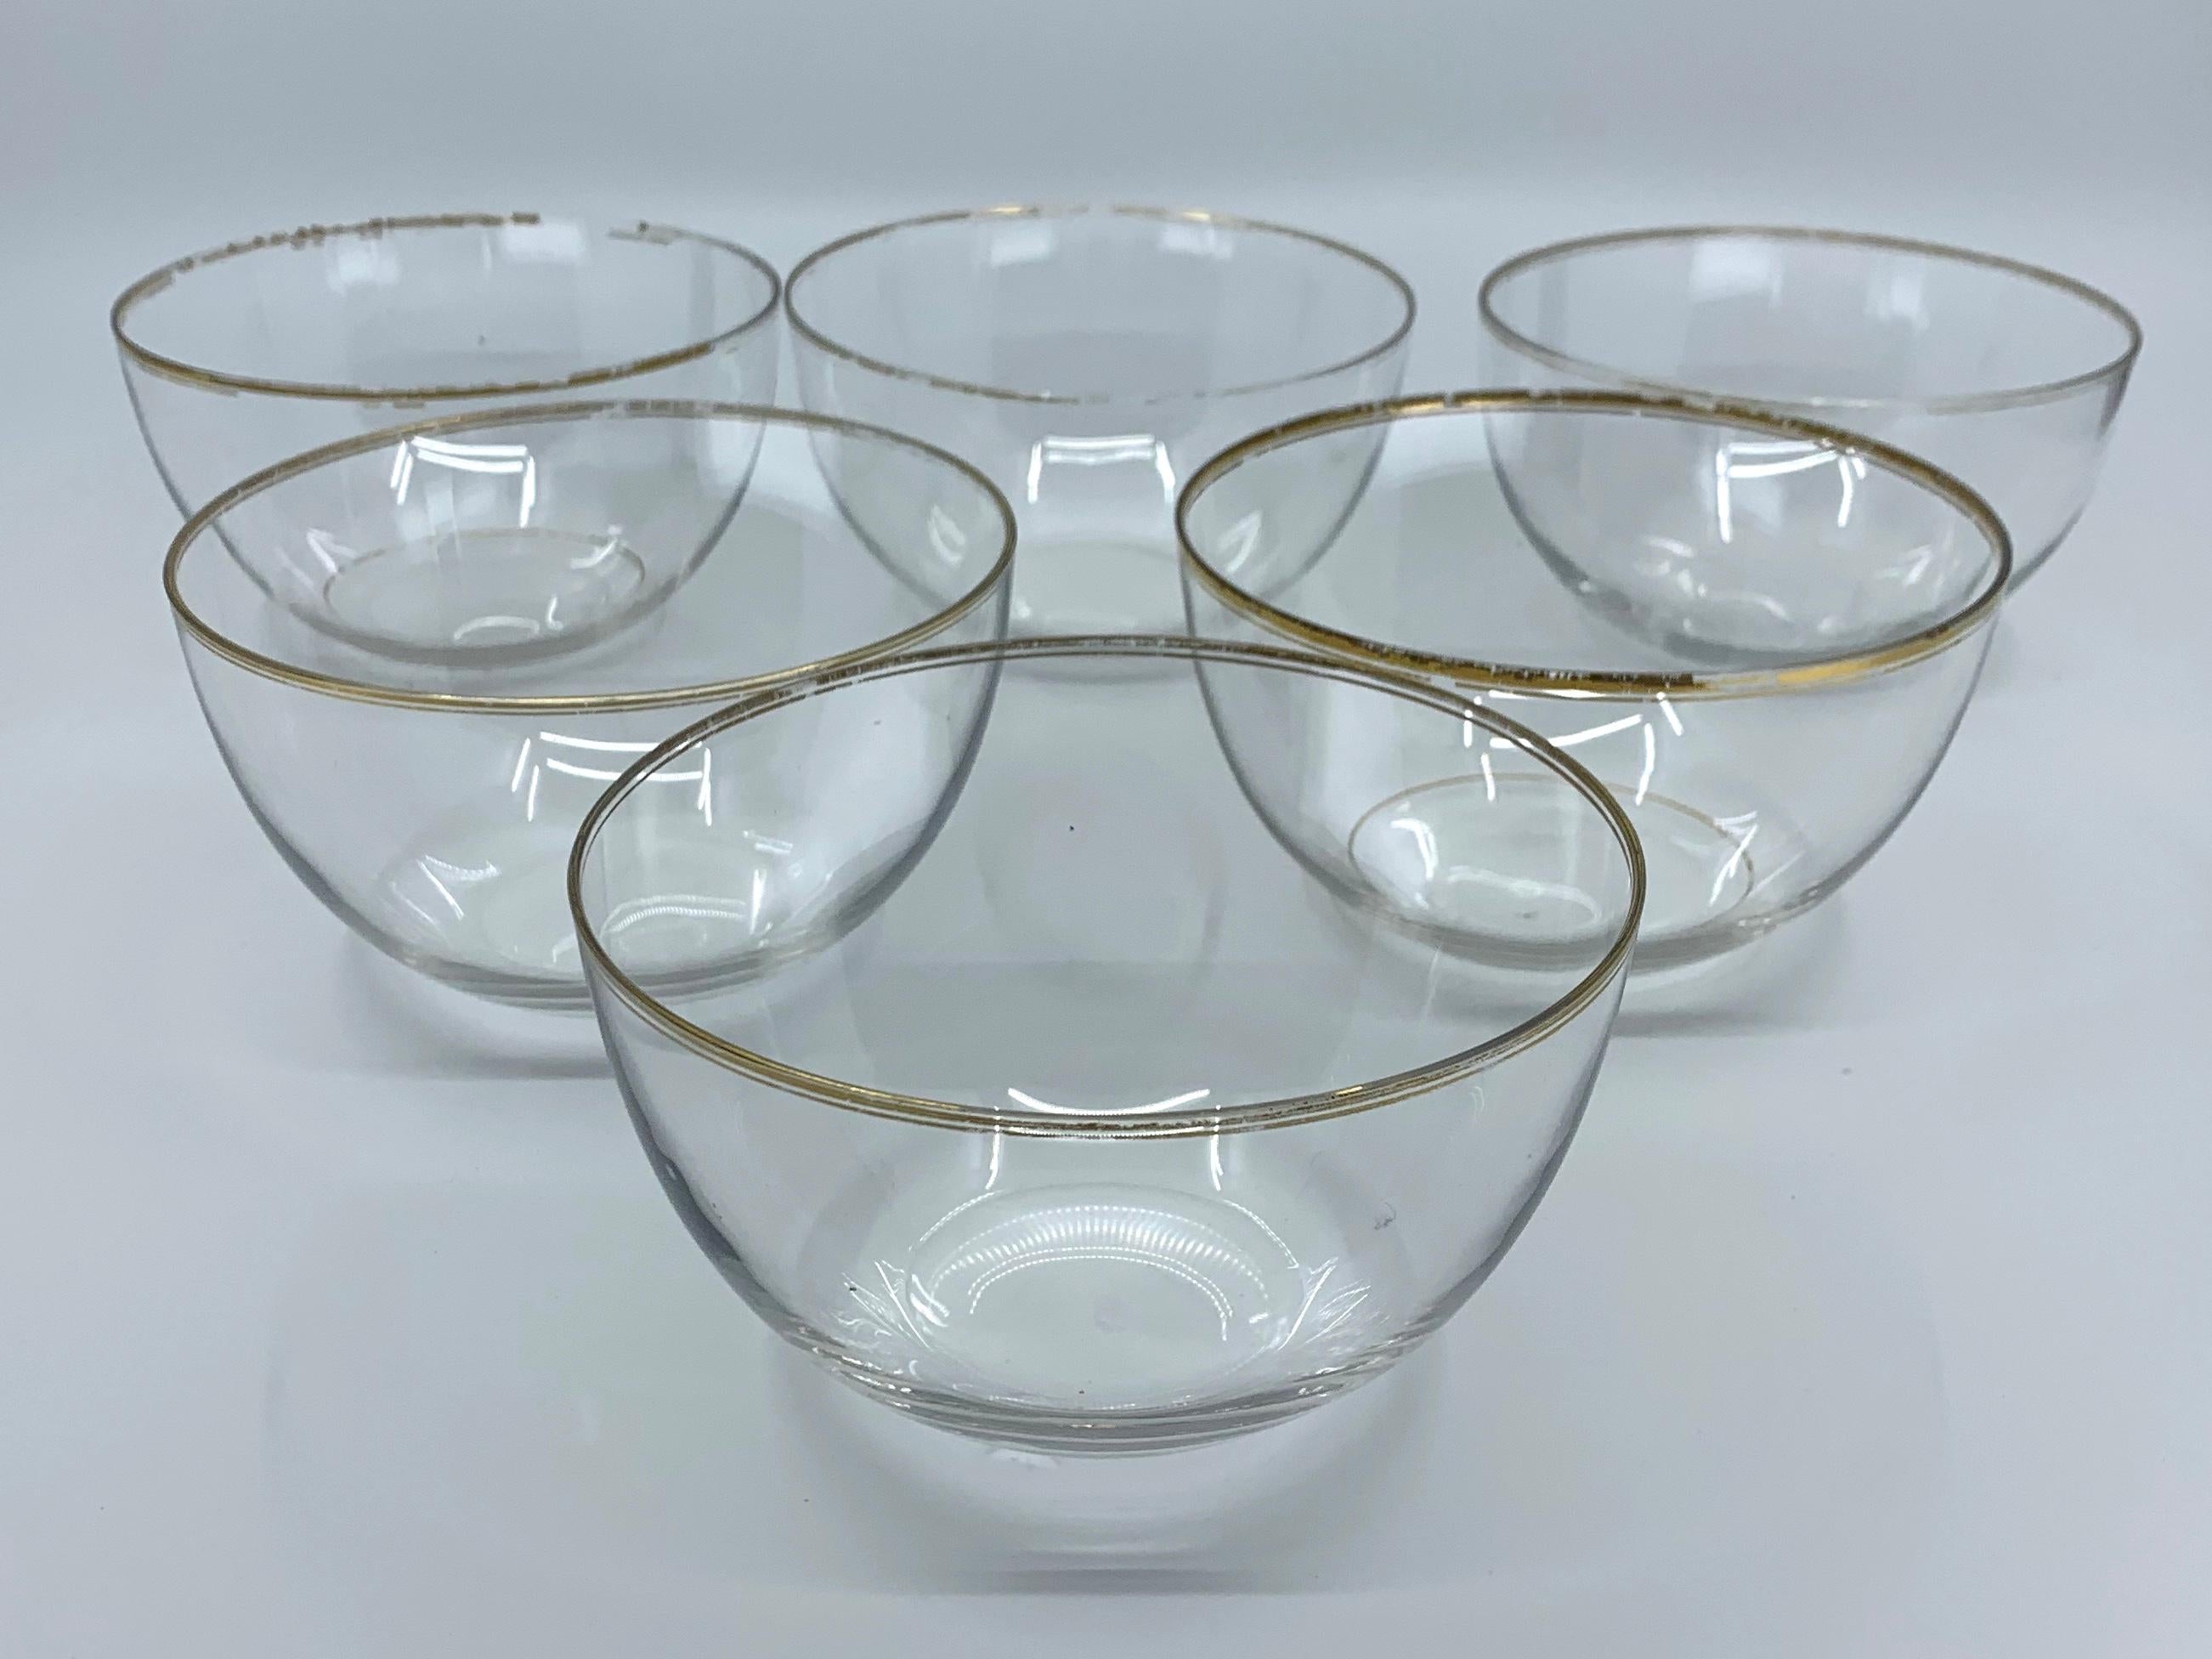 Set of six glass bowls with gilt rim. Six antique gilt-rimmed finger bowls/ice cream bowls/floating rose bowls to set at table. France, circa 1920s.
Diameter: 4.5